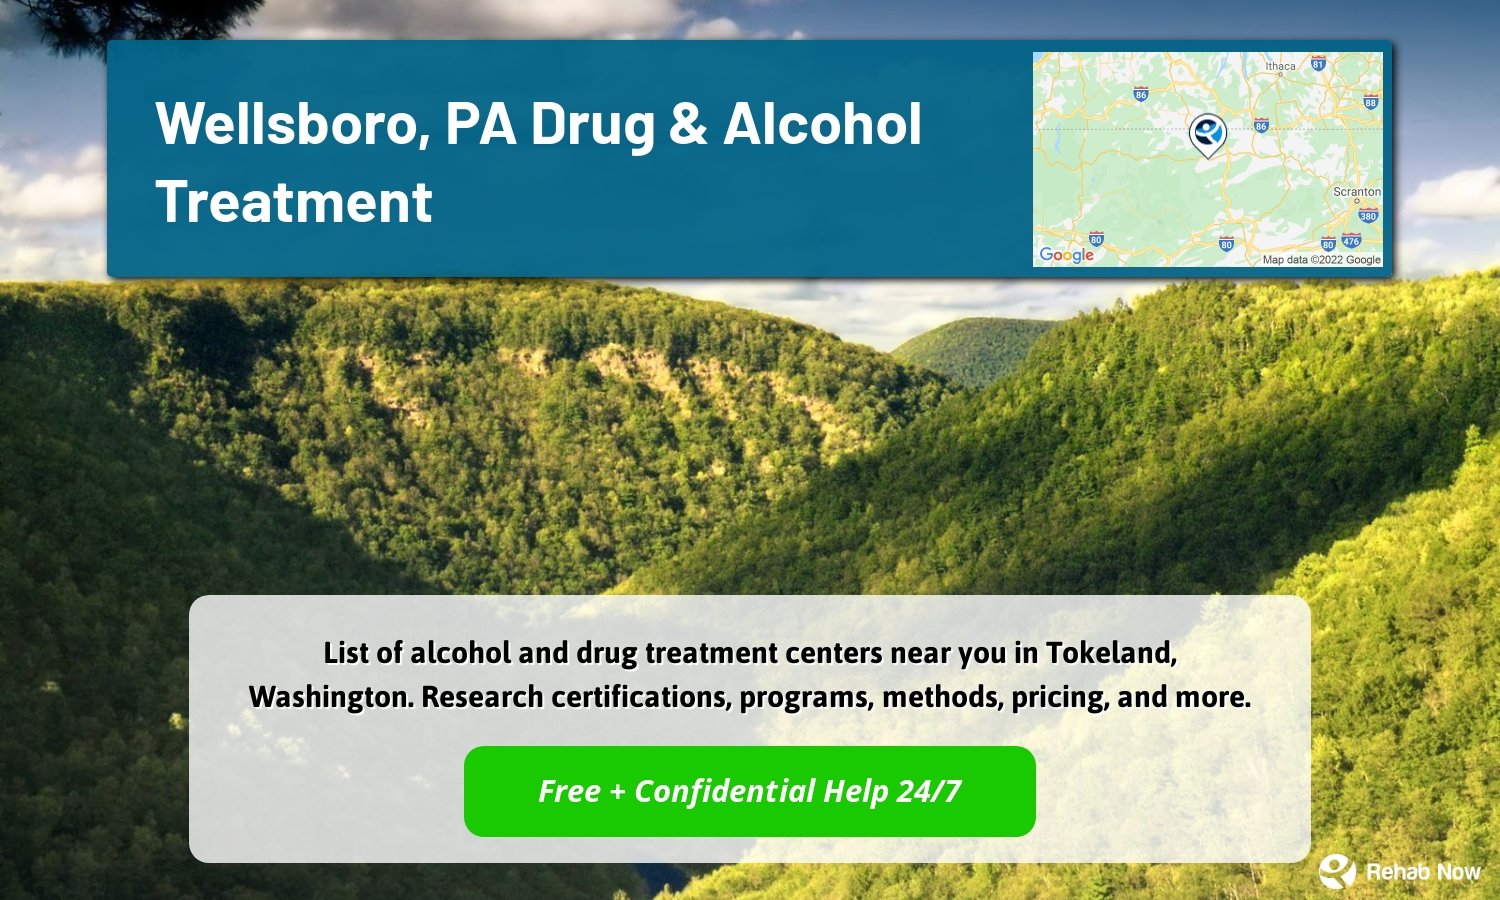 List of alcohol and drug treatment centers near you in Tokeland, Washington. Research certifications, programs, methods, pricing, and more.